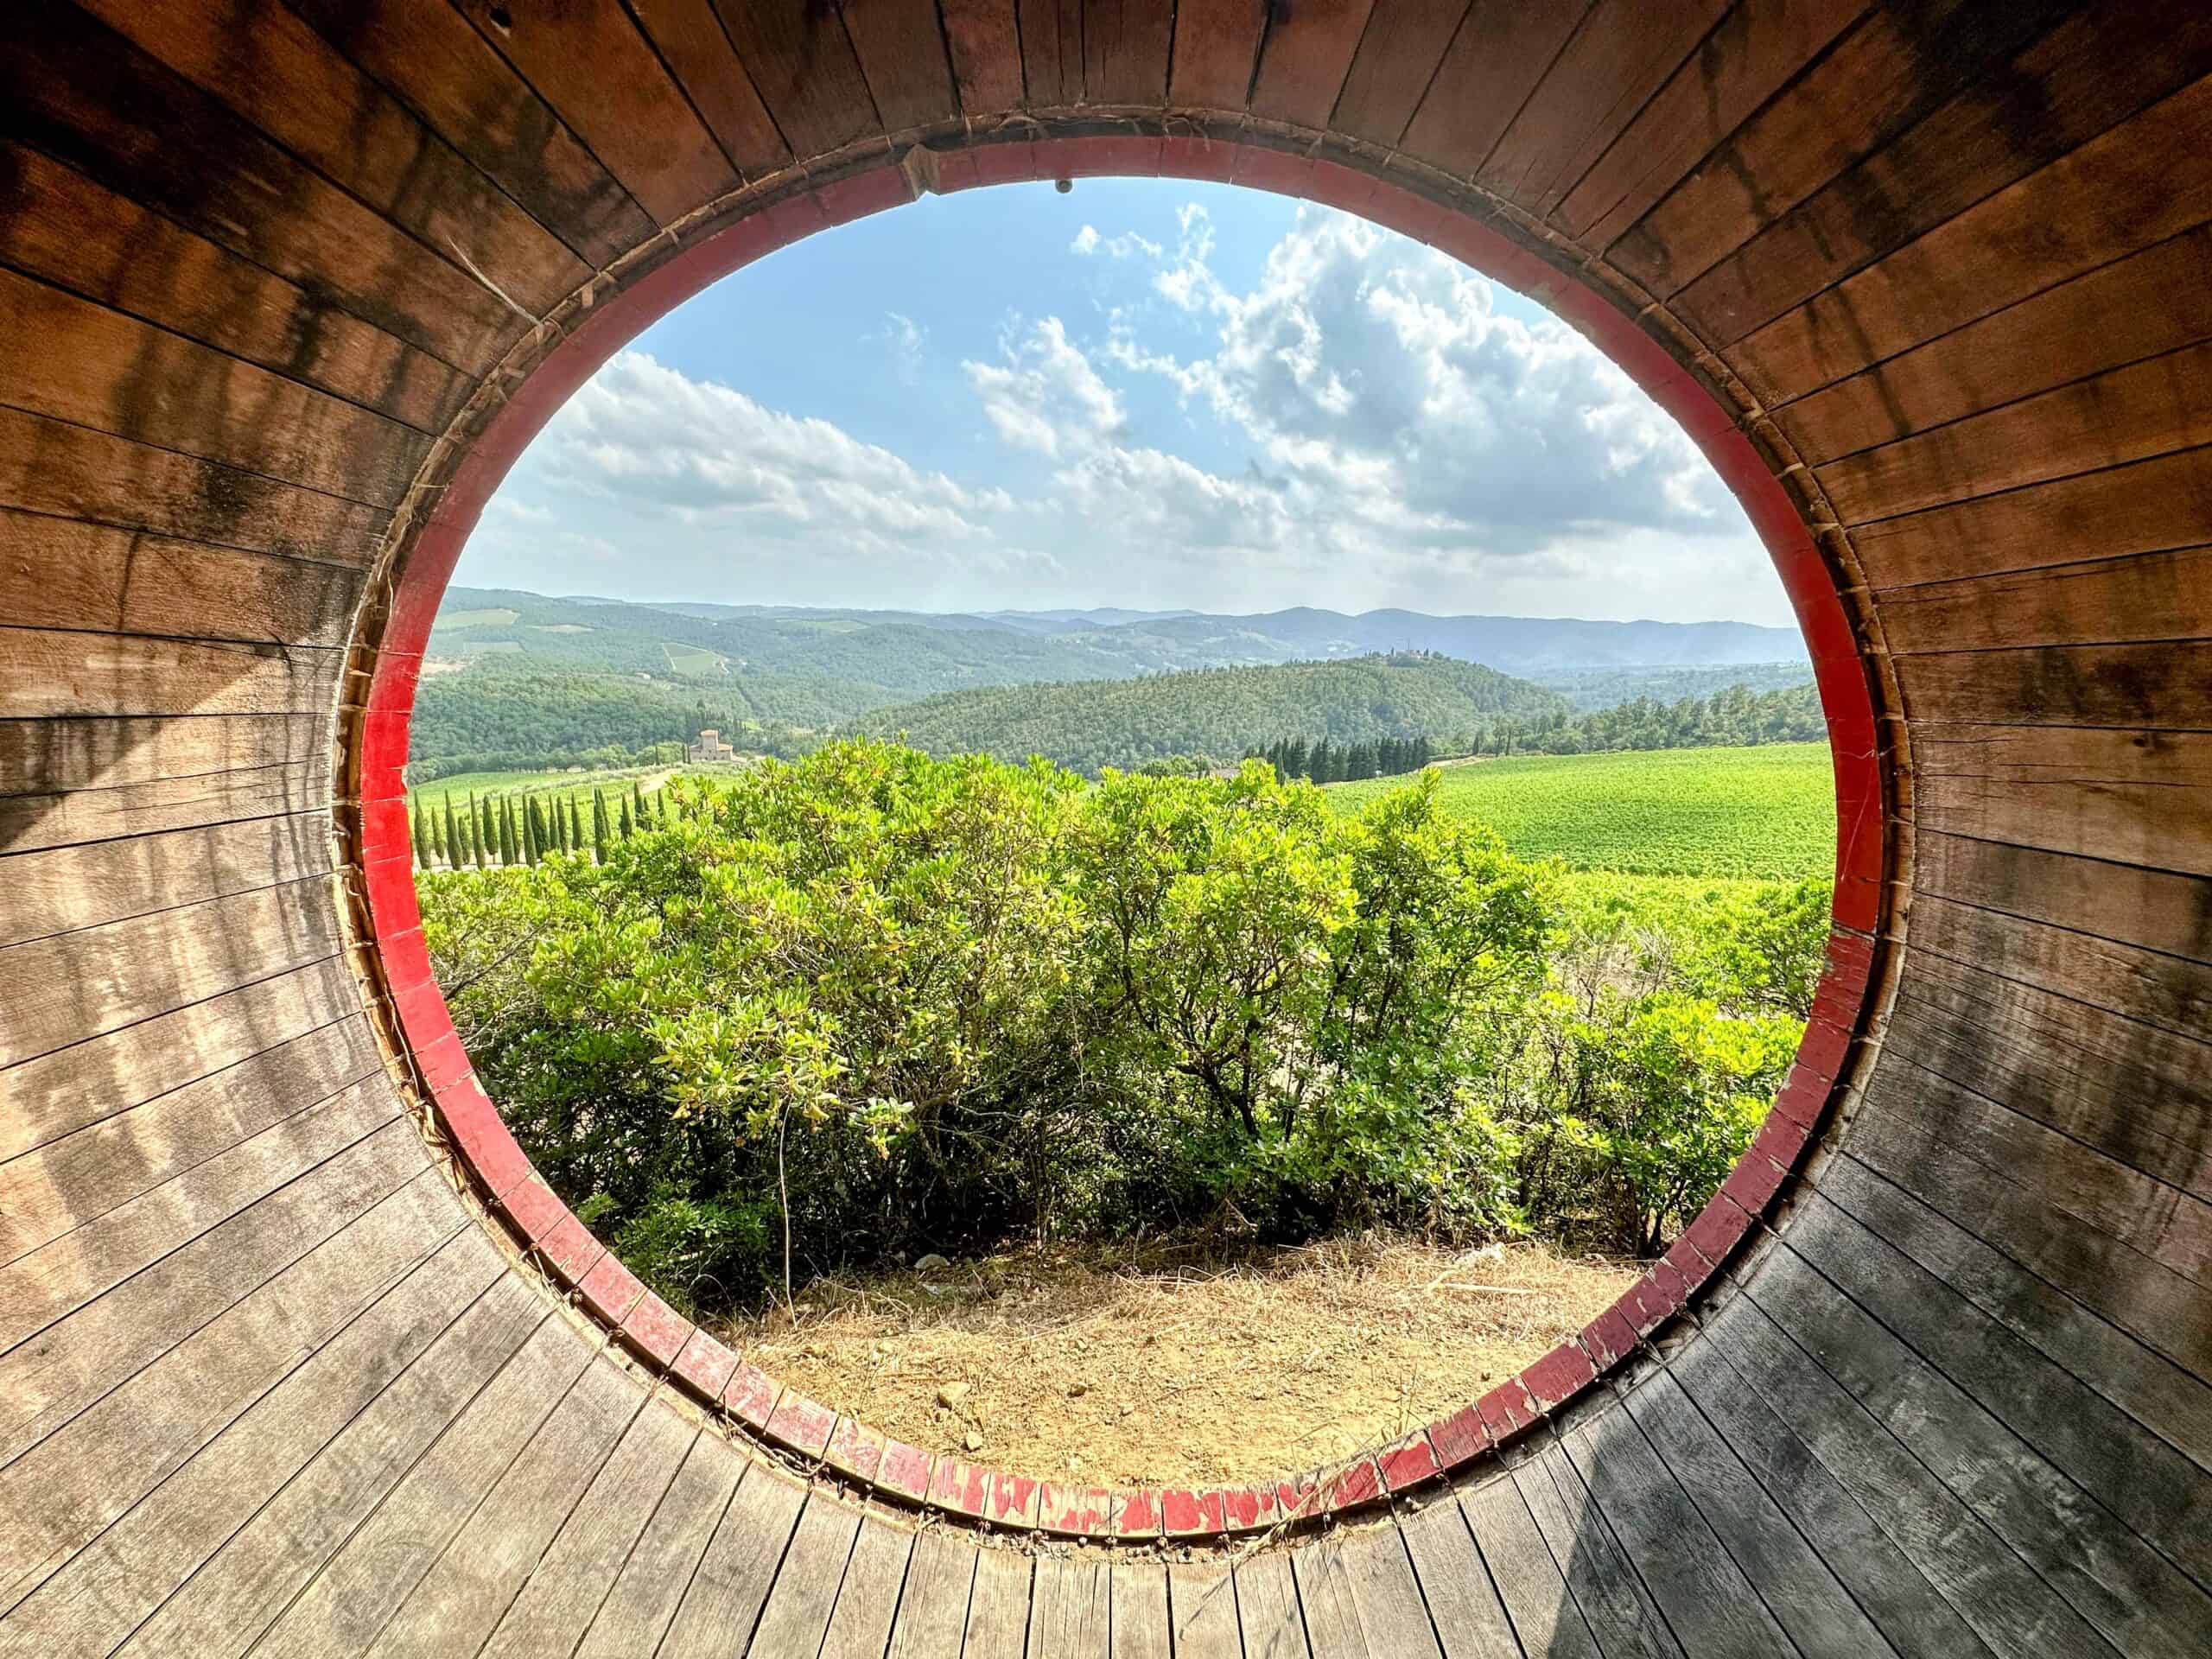 Looking through a large wine barrel at the countryside and vineyards in Chianti, Tuscany, Italy.